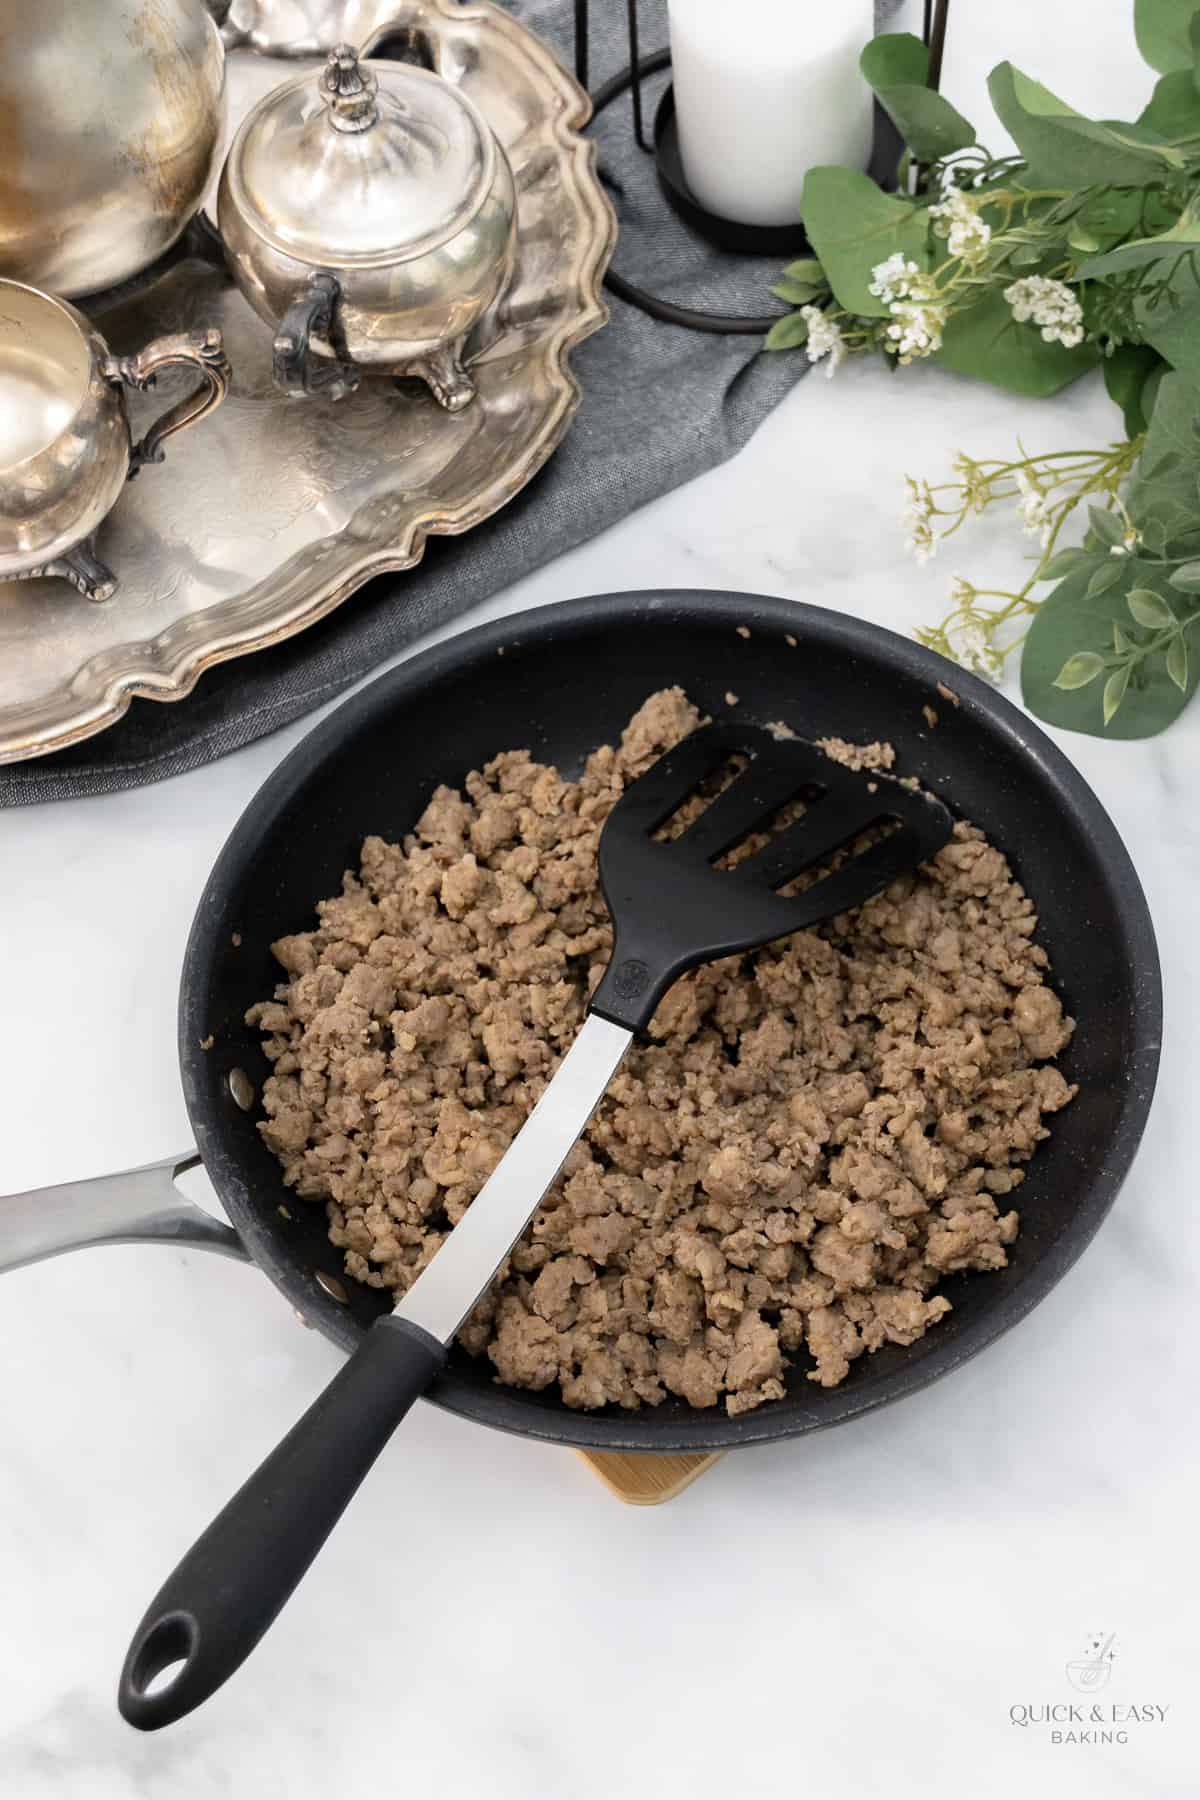 Breakfast sausage cooked into a skillet.